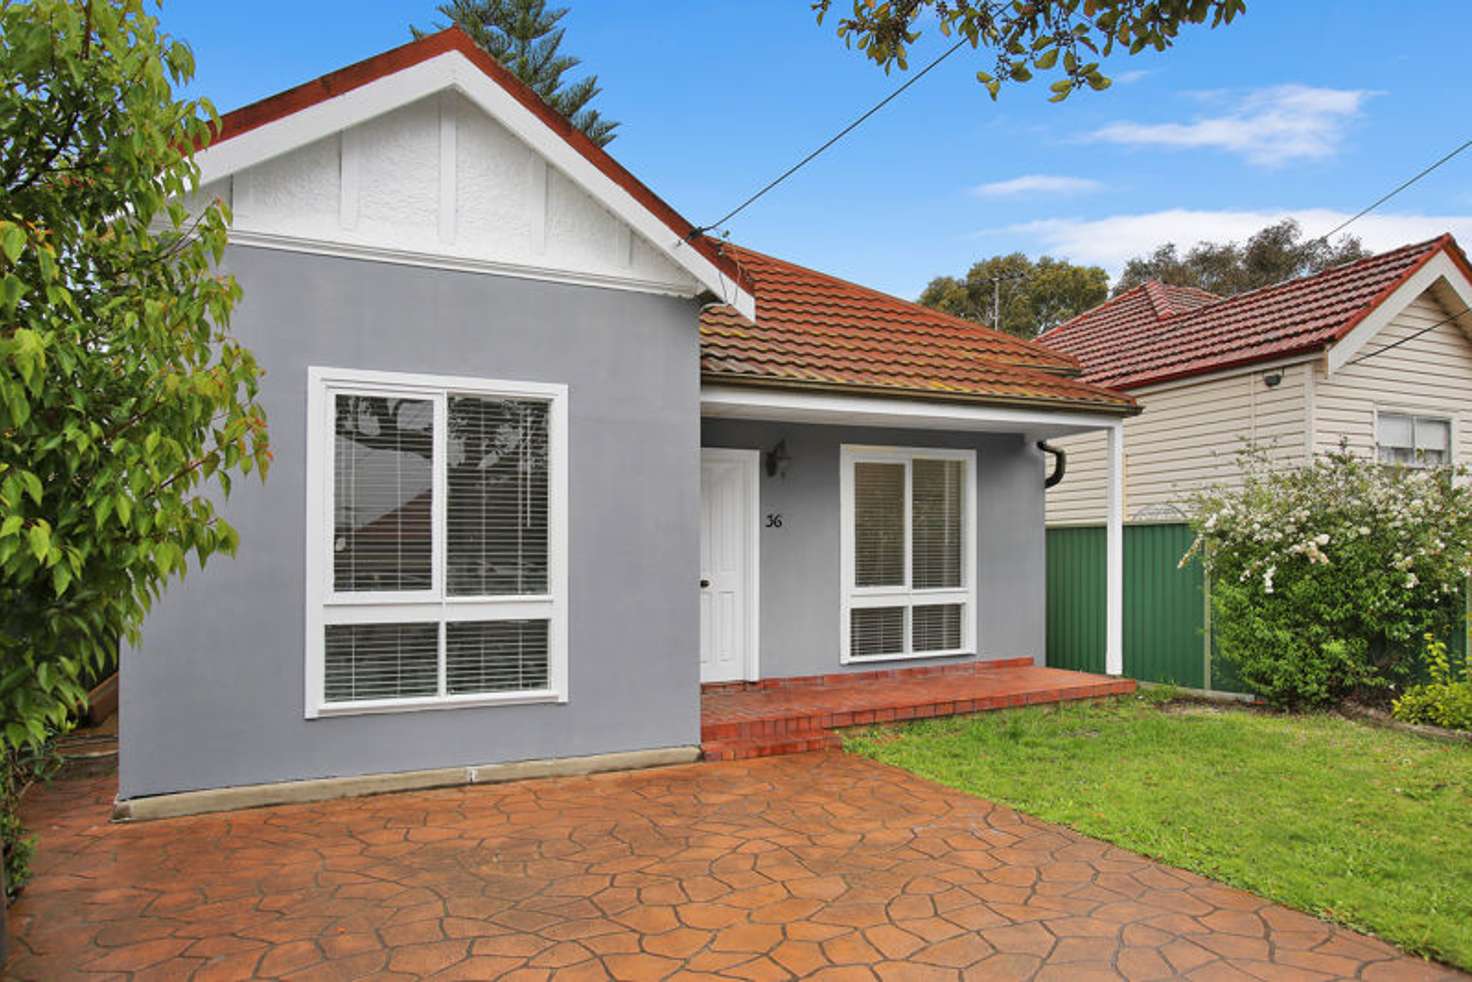 Main view of Homely house listing, 36 Chisholm Road, Auburn NSW 2144